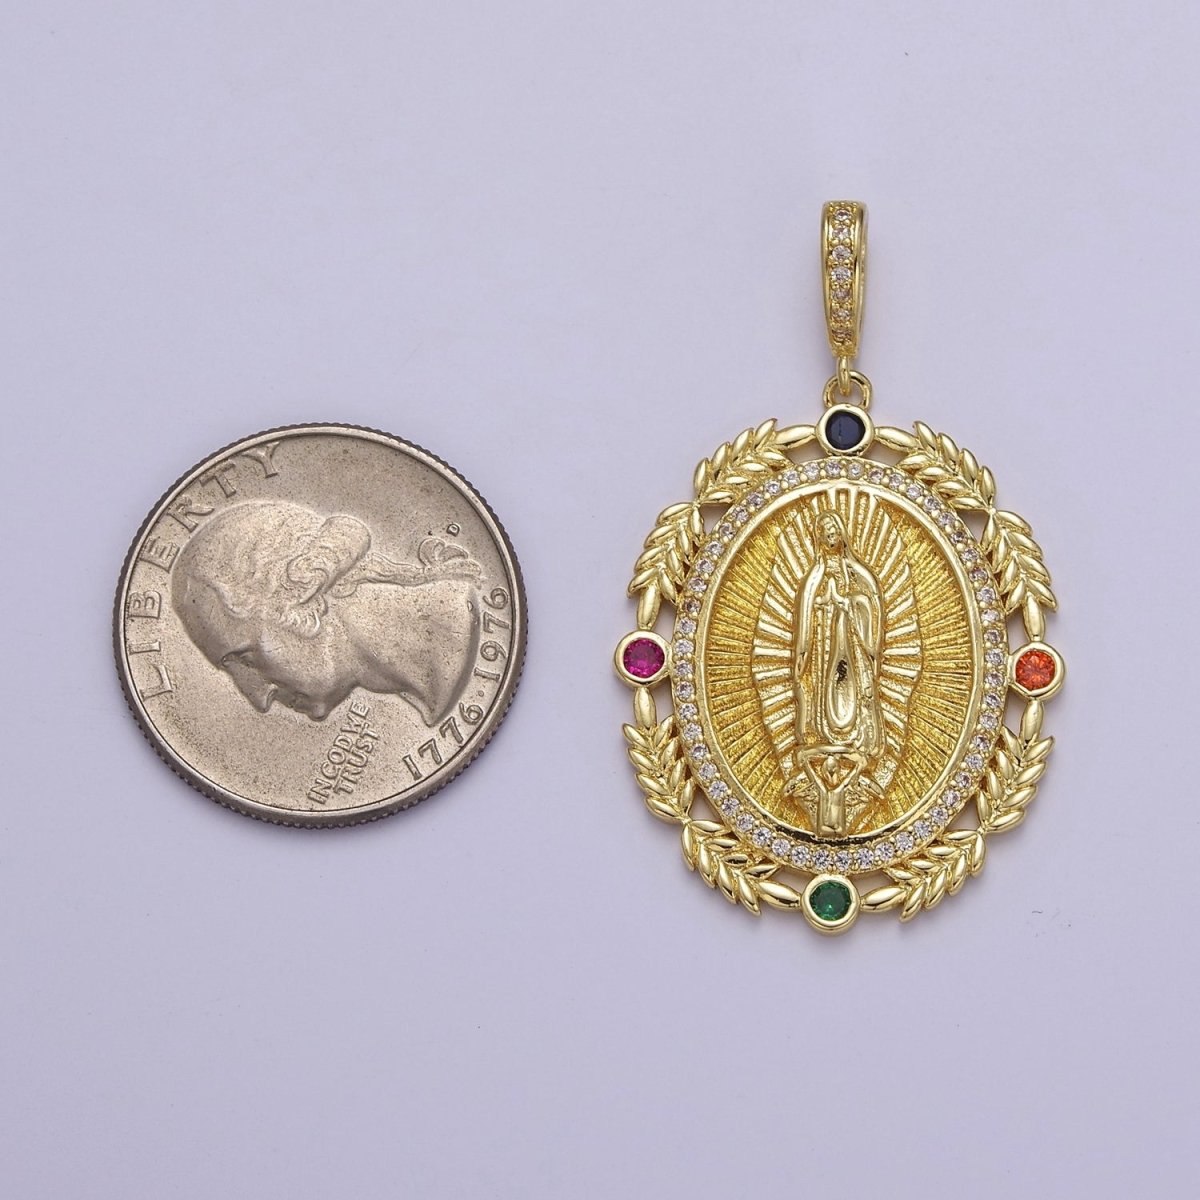 24K Gold Filled Virgin Mary Pendant Gold Lady Guadalupe Medallion Charm for Religious Necklace J-735 - DLUXCA